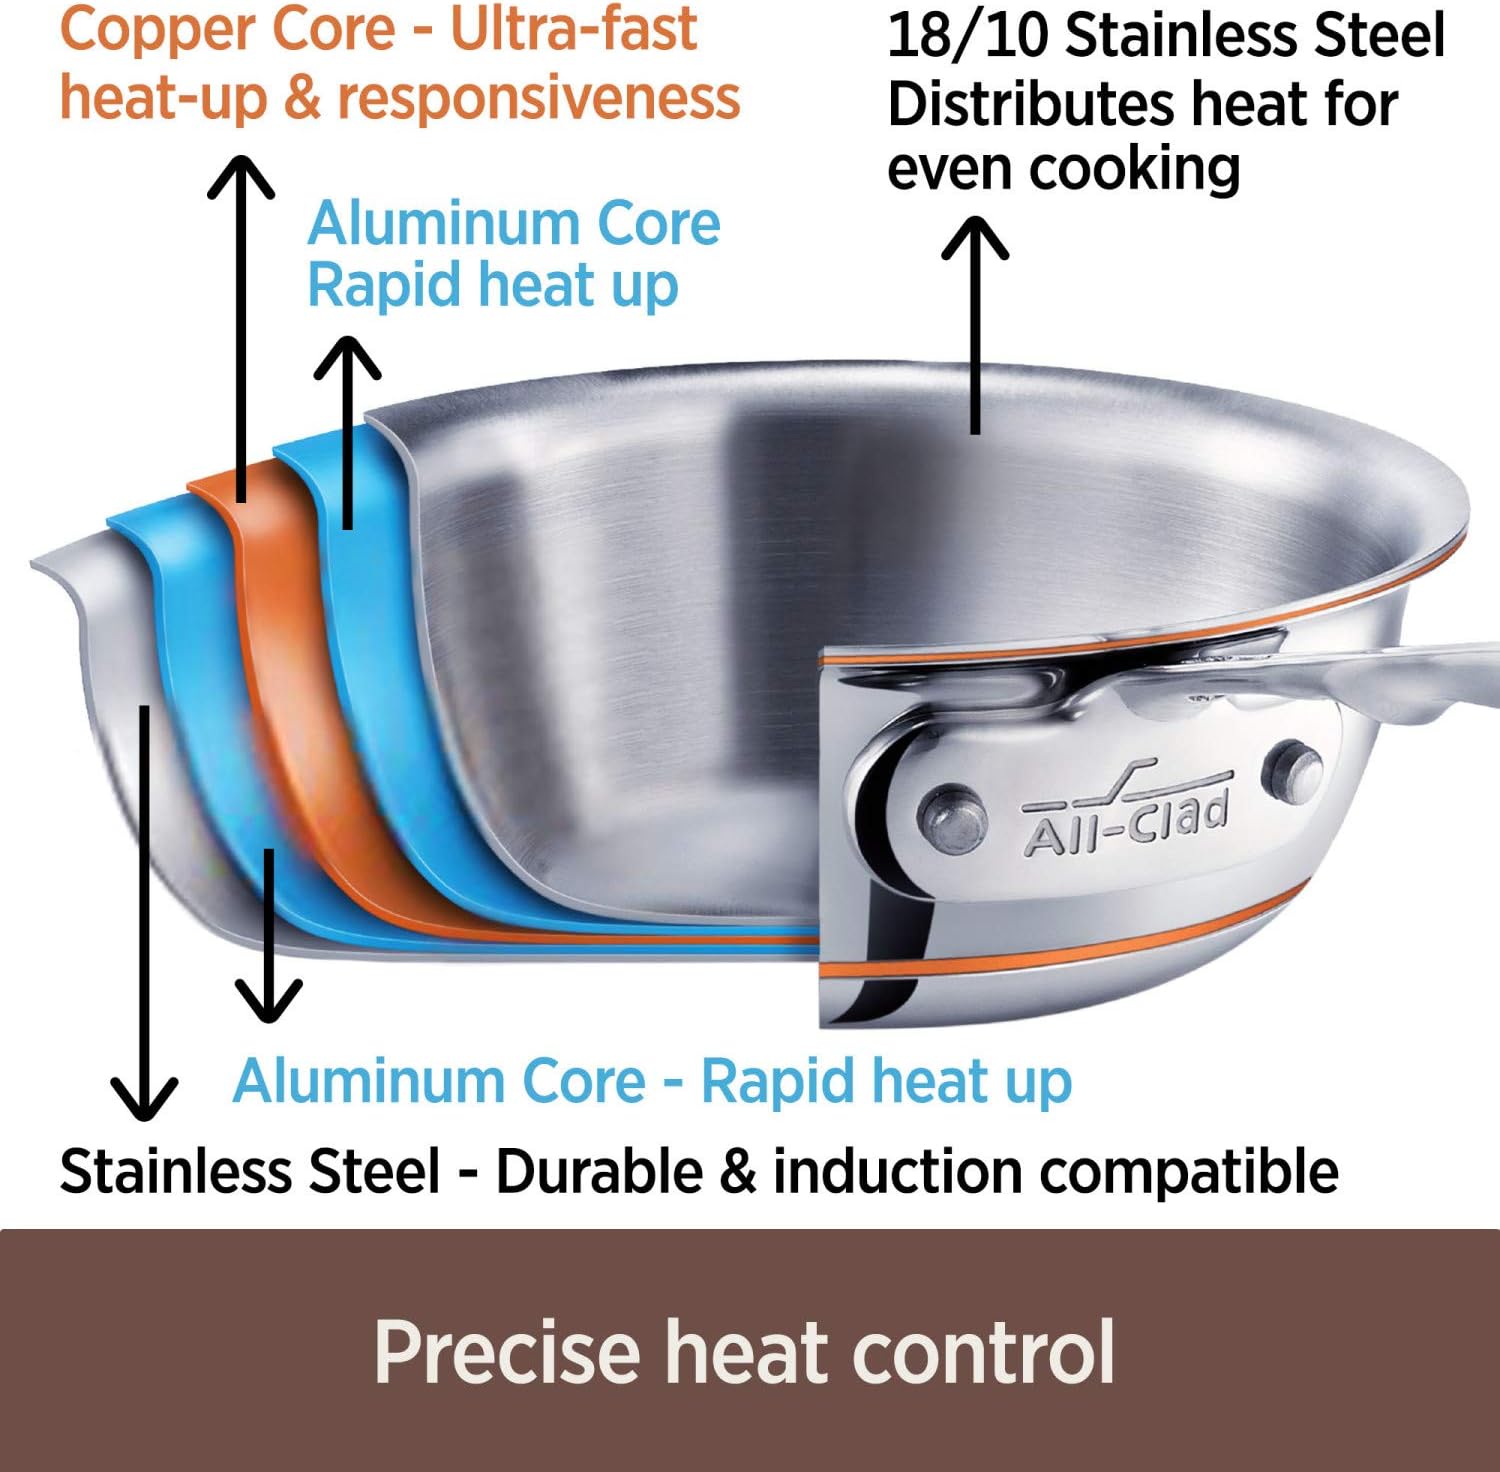 https://bigbigmart.com/wp-content/uploads/2023/09/All-Clad-Fry-Pan-8-Inch-Stainless-Steel1.jpg